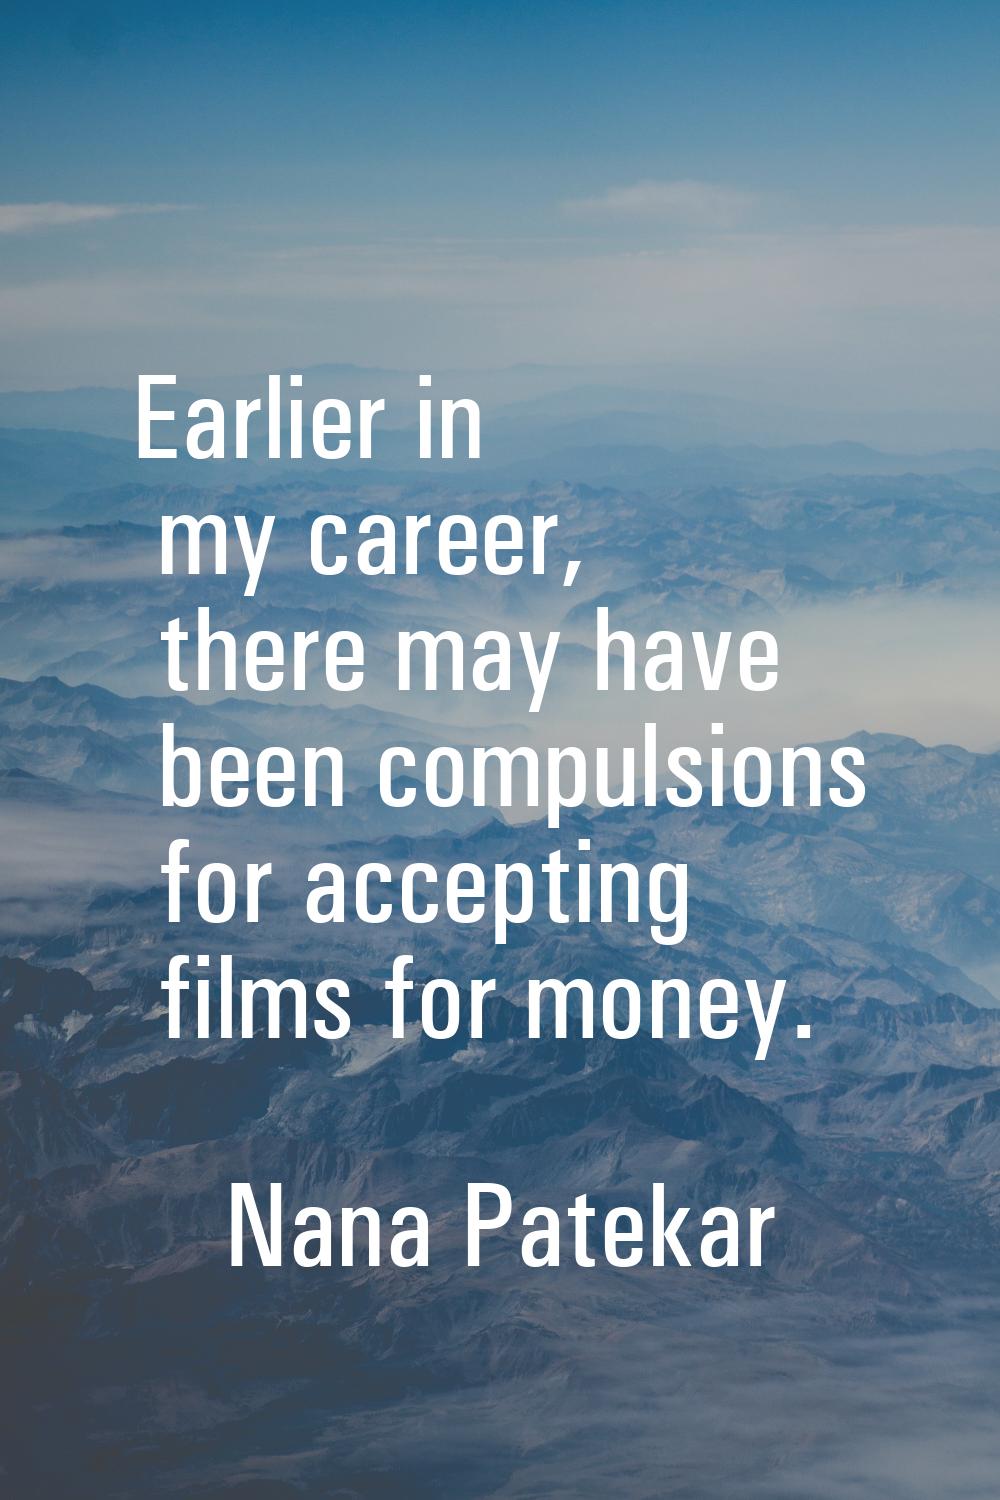 Earlier in my career, there may have been compulsions for accepting films for money.